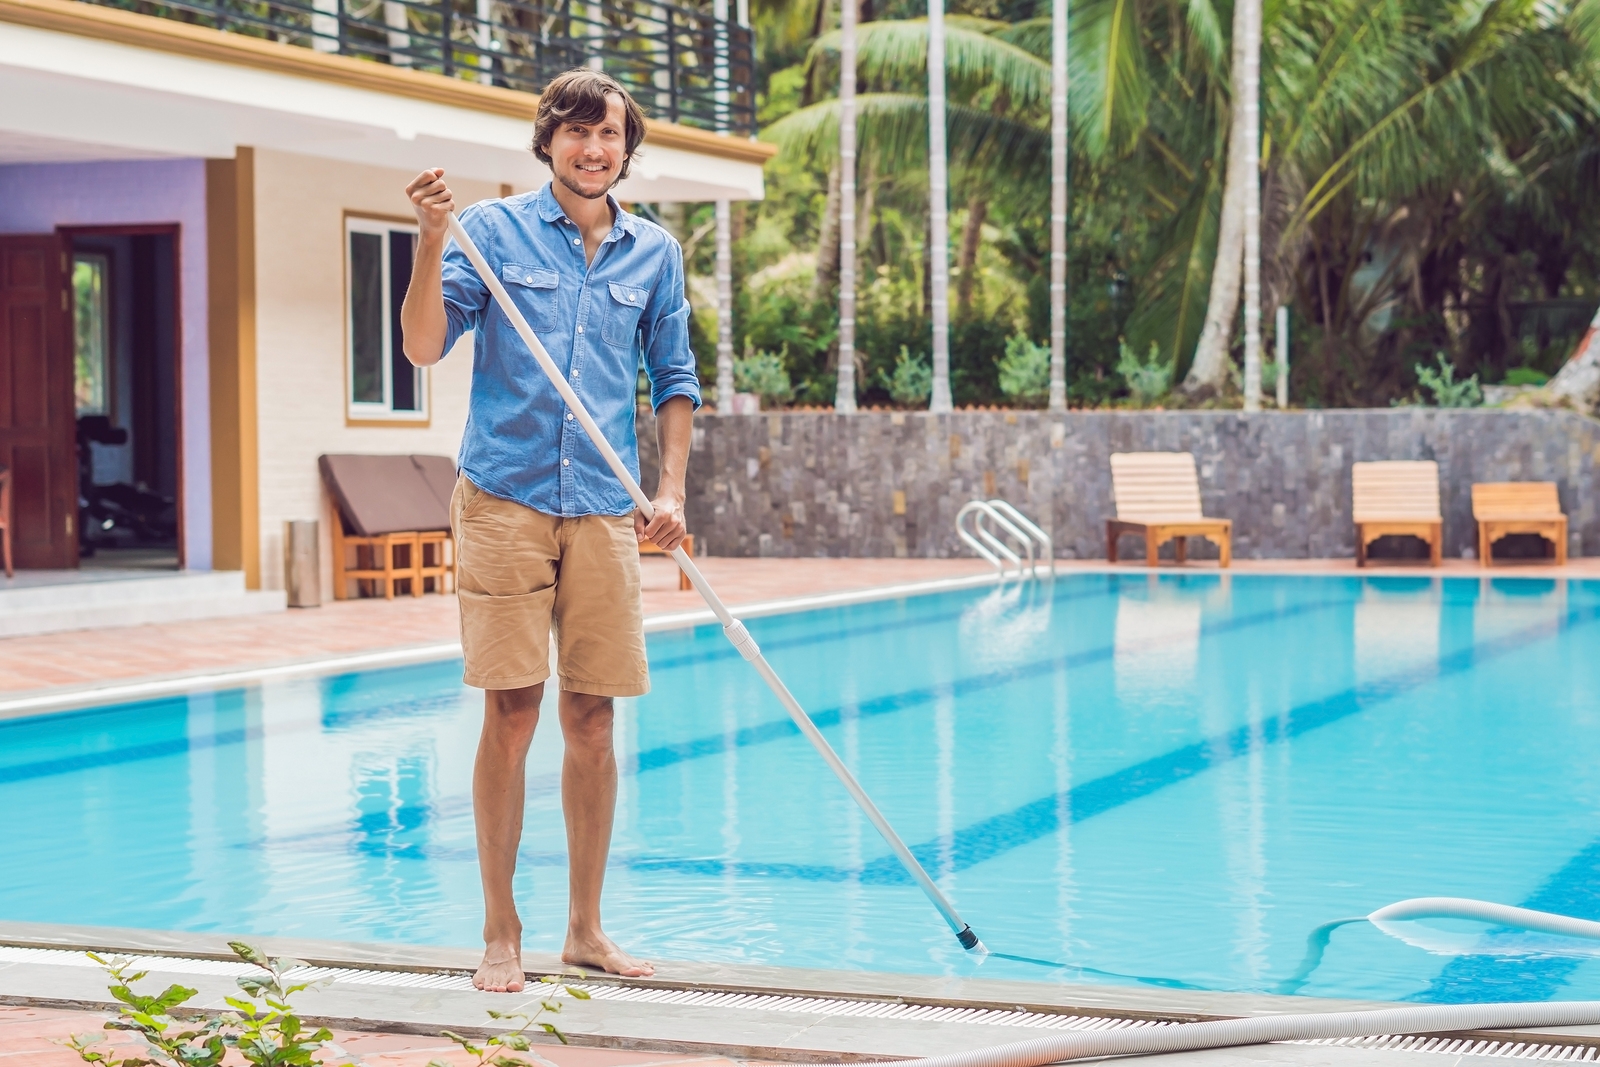 The top 5 swimming pool maintenance tips every pool owner should know